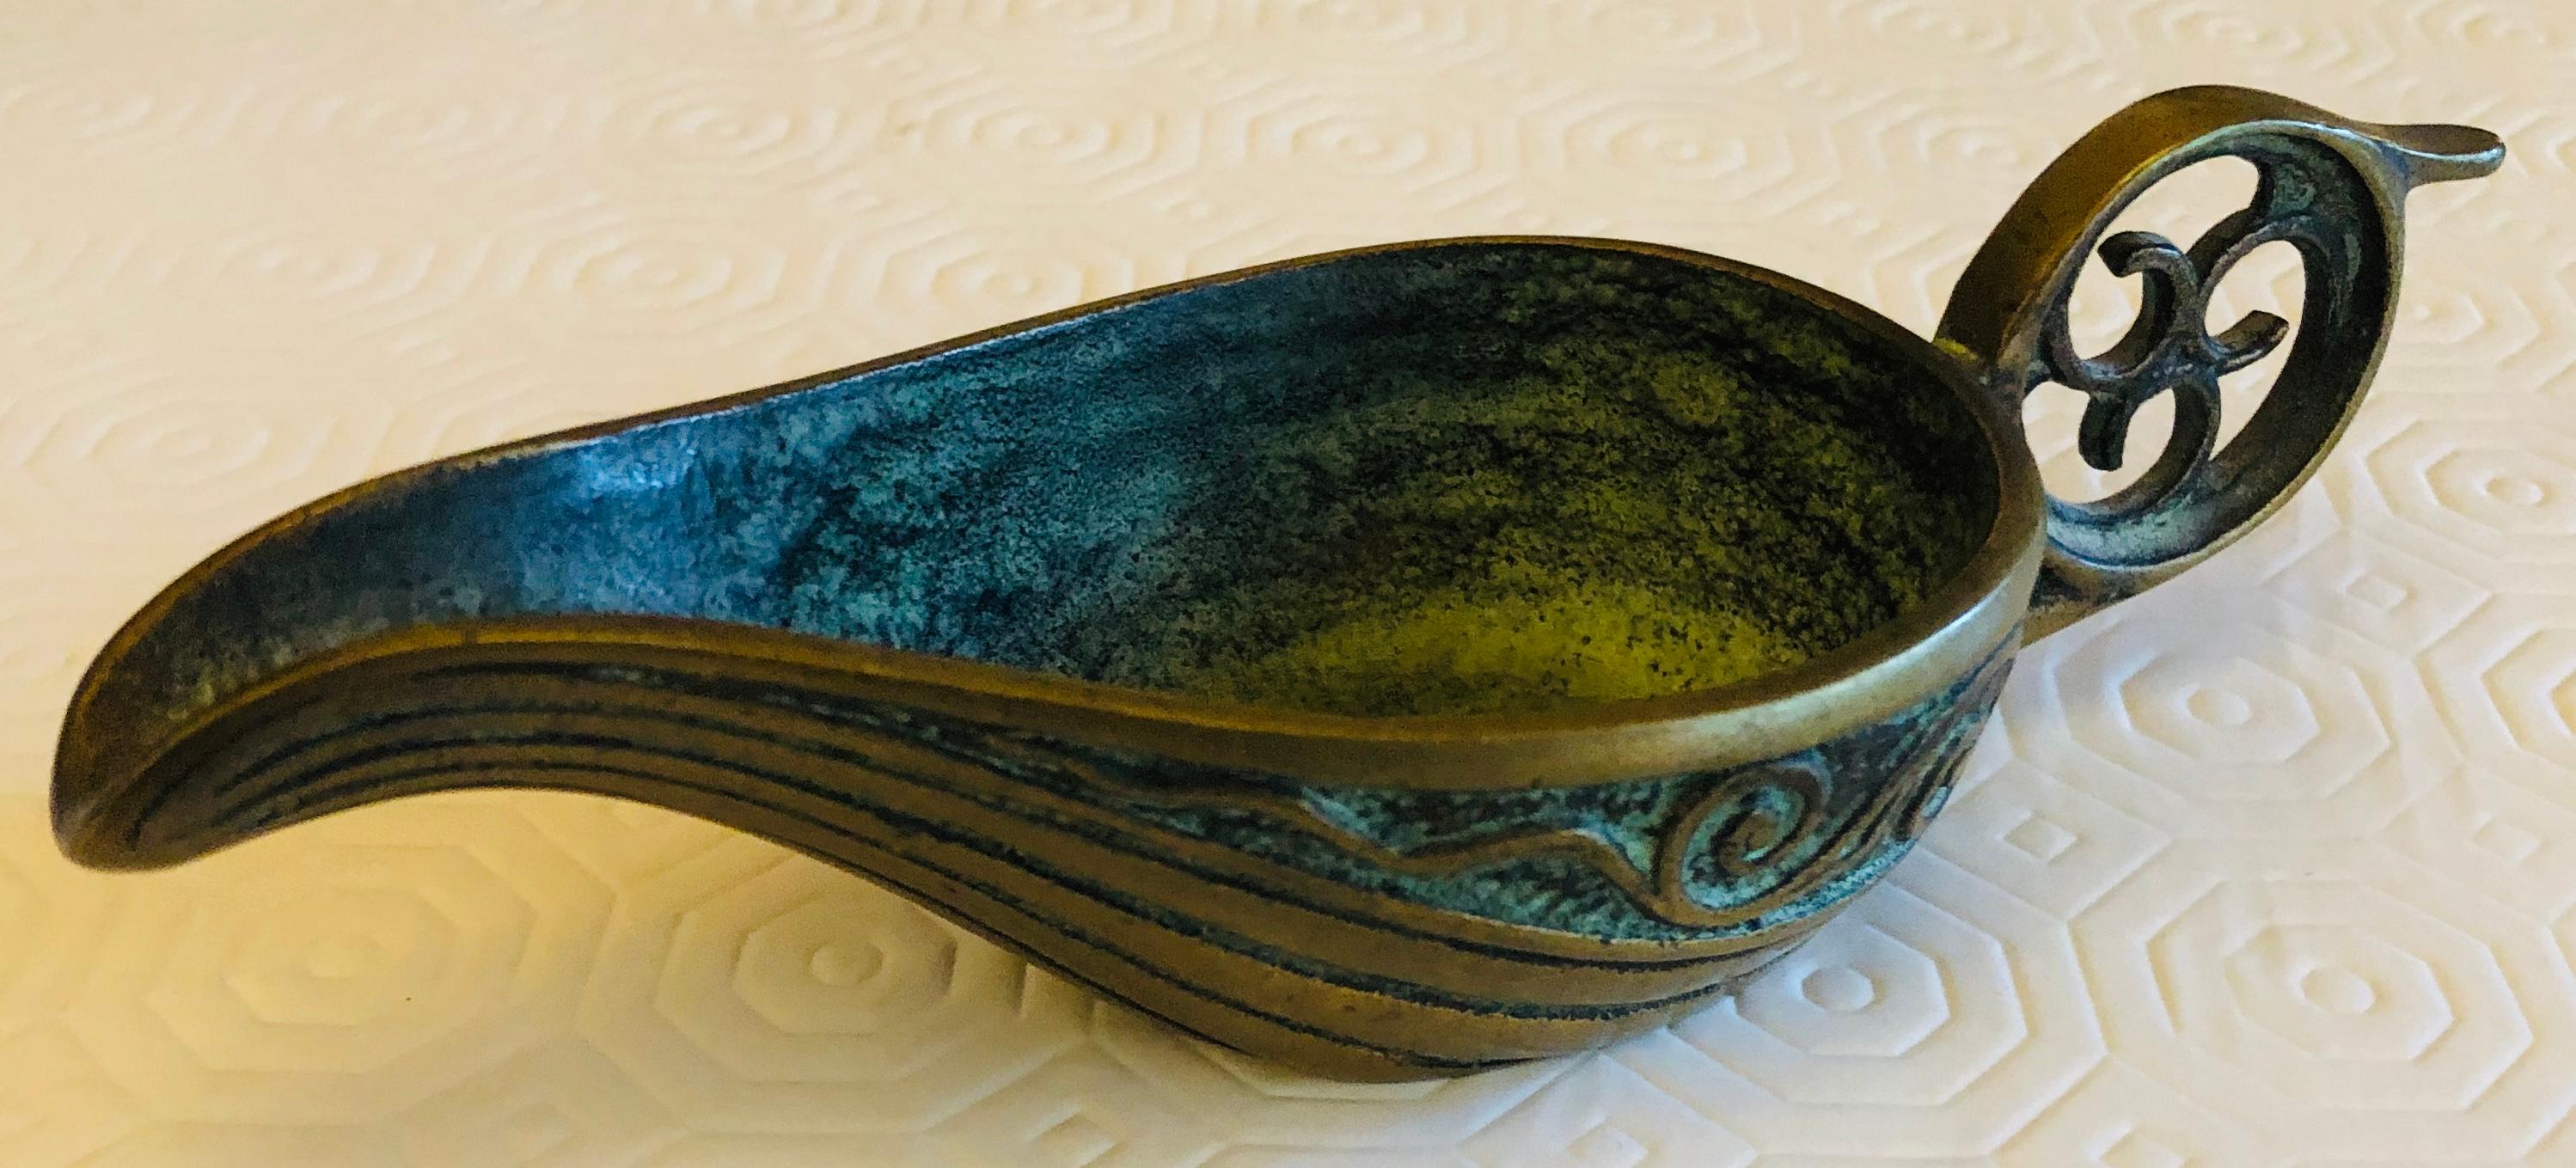 Hand-Crafted Max Le Verrier Art Deco Bronze Key Bowl or Vide Poche, Signed